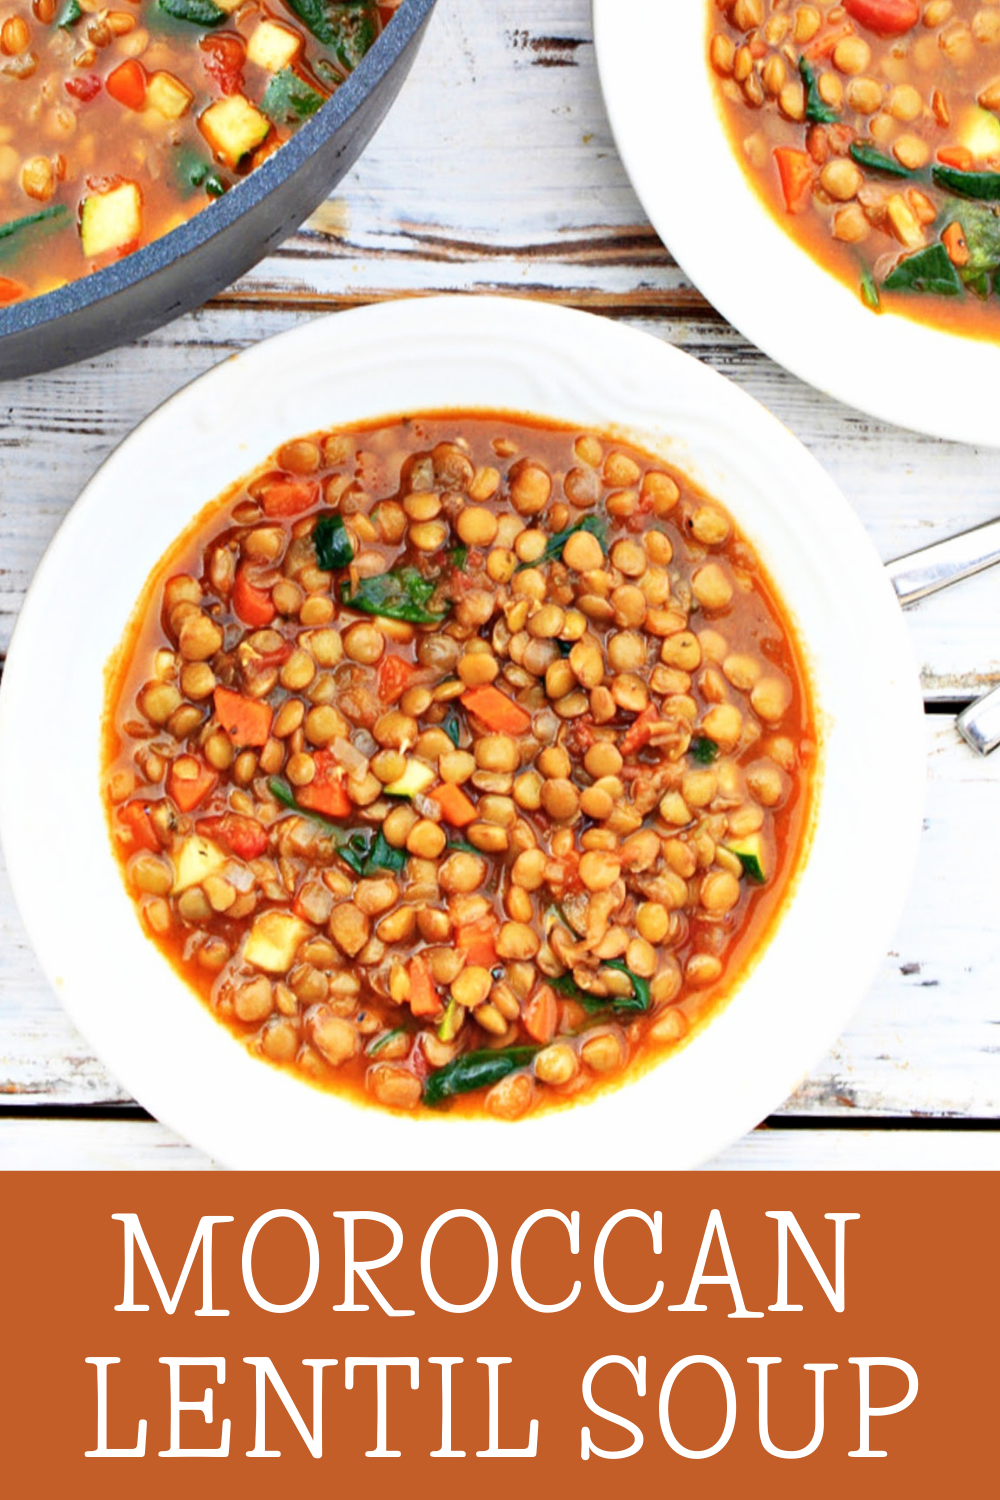 Moroccan Lentil Soup ~ This hearty and fragrant one-pot meal is quick to make and packed with good-for-you ingredients! Perfect for easy weekday cooking or meal prep! via @thiswifecooks